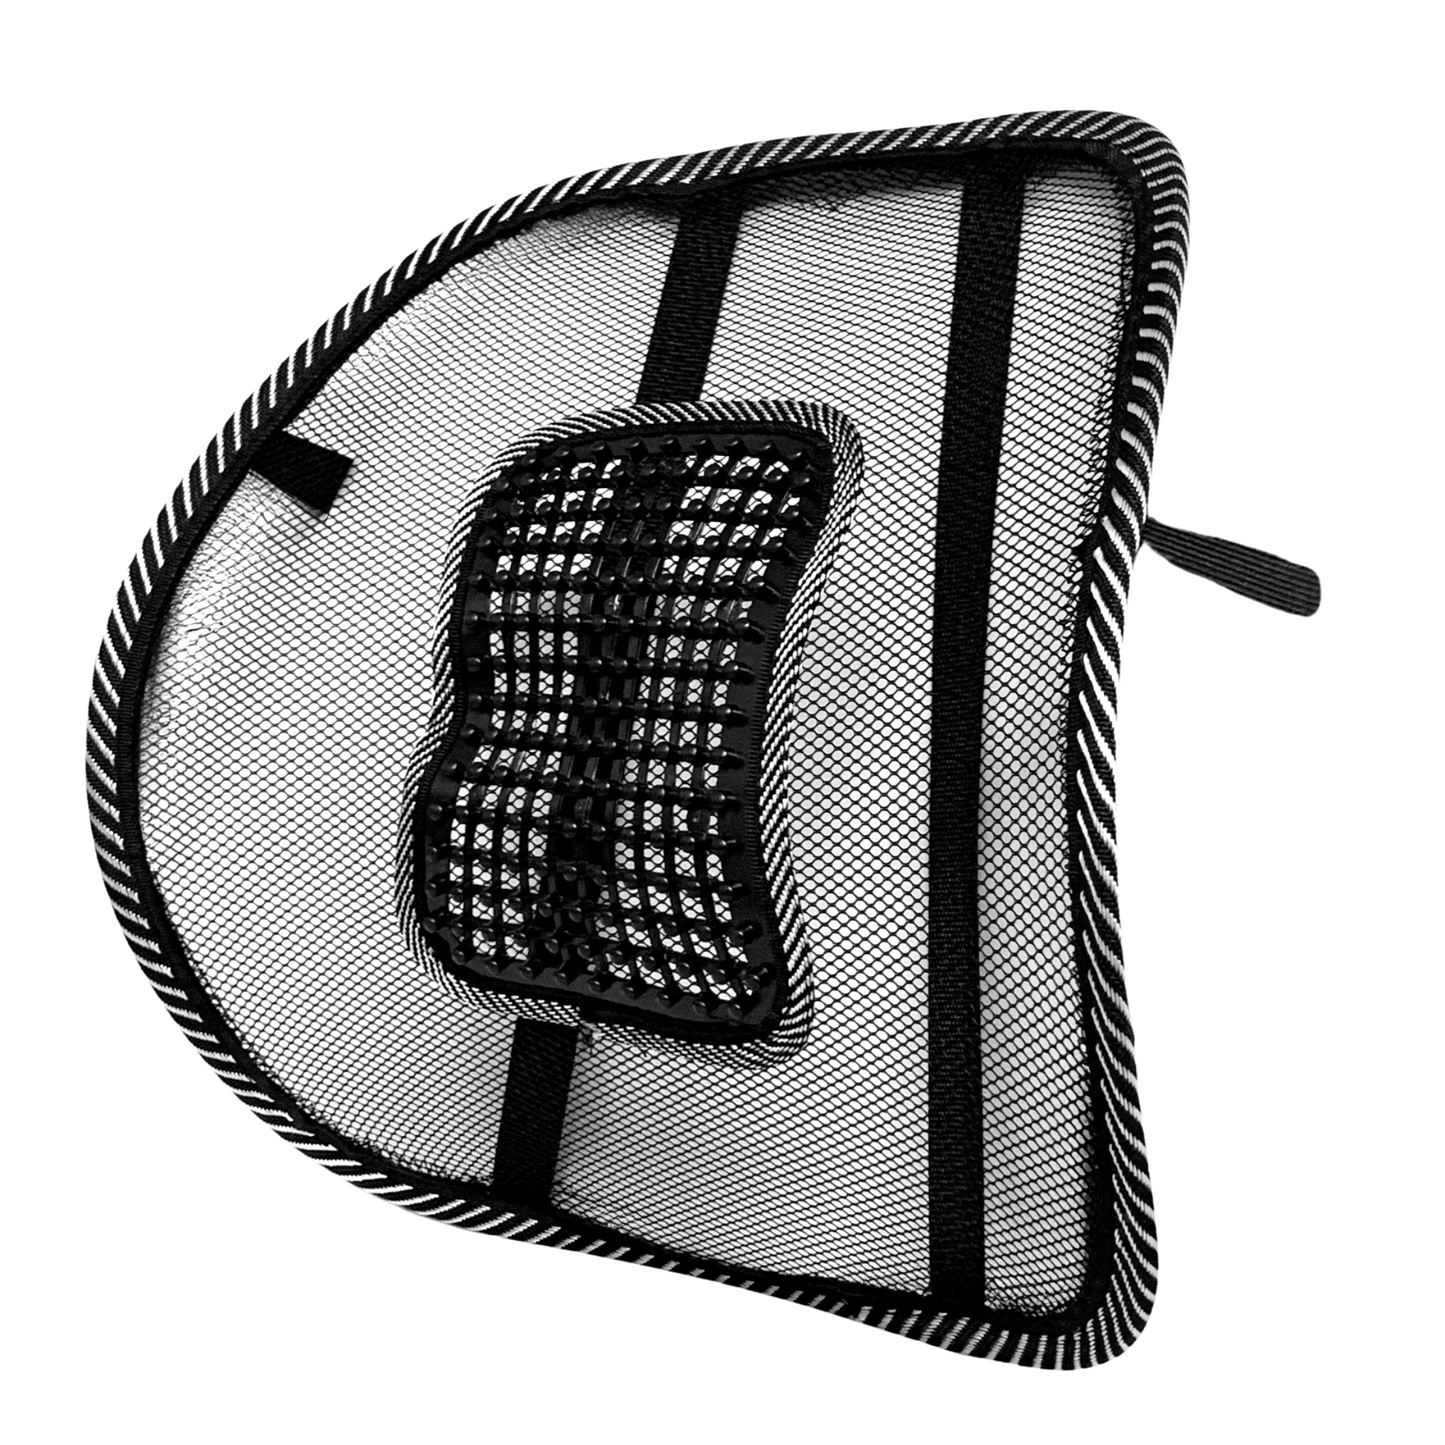 Mesh lumbar back support for office chair or car seat